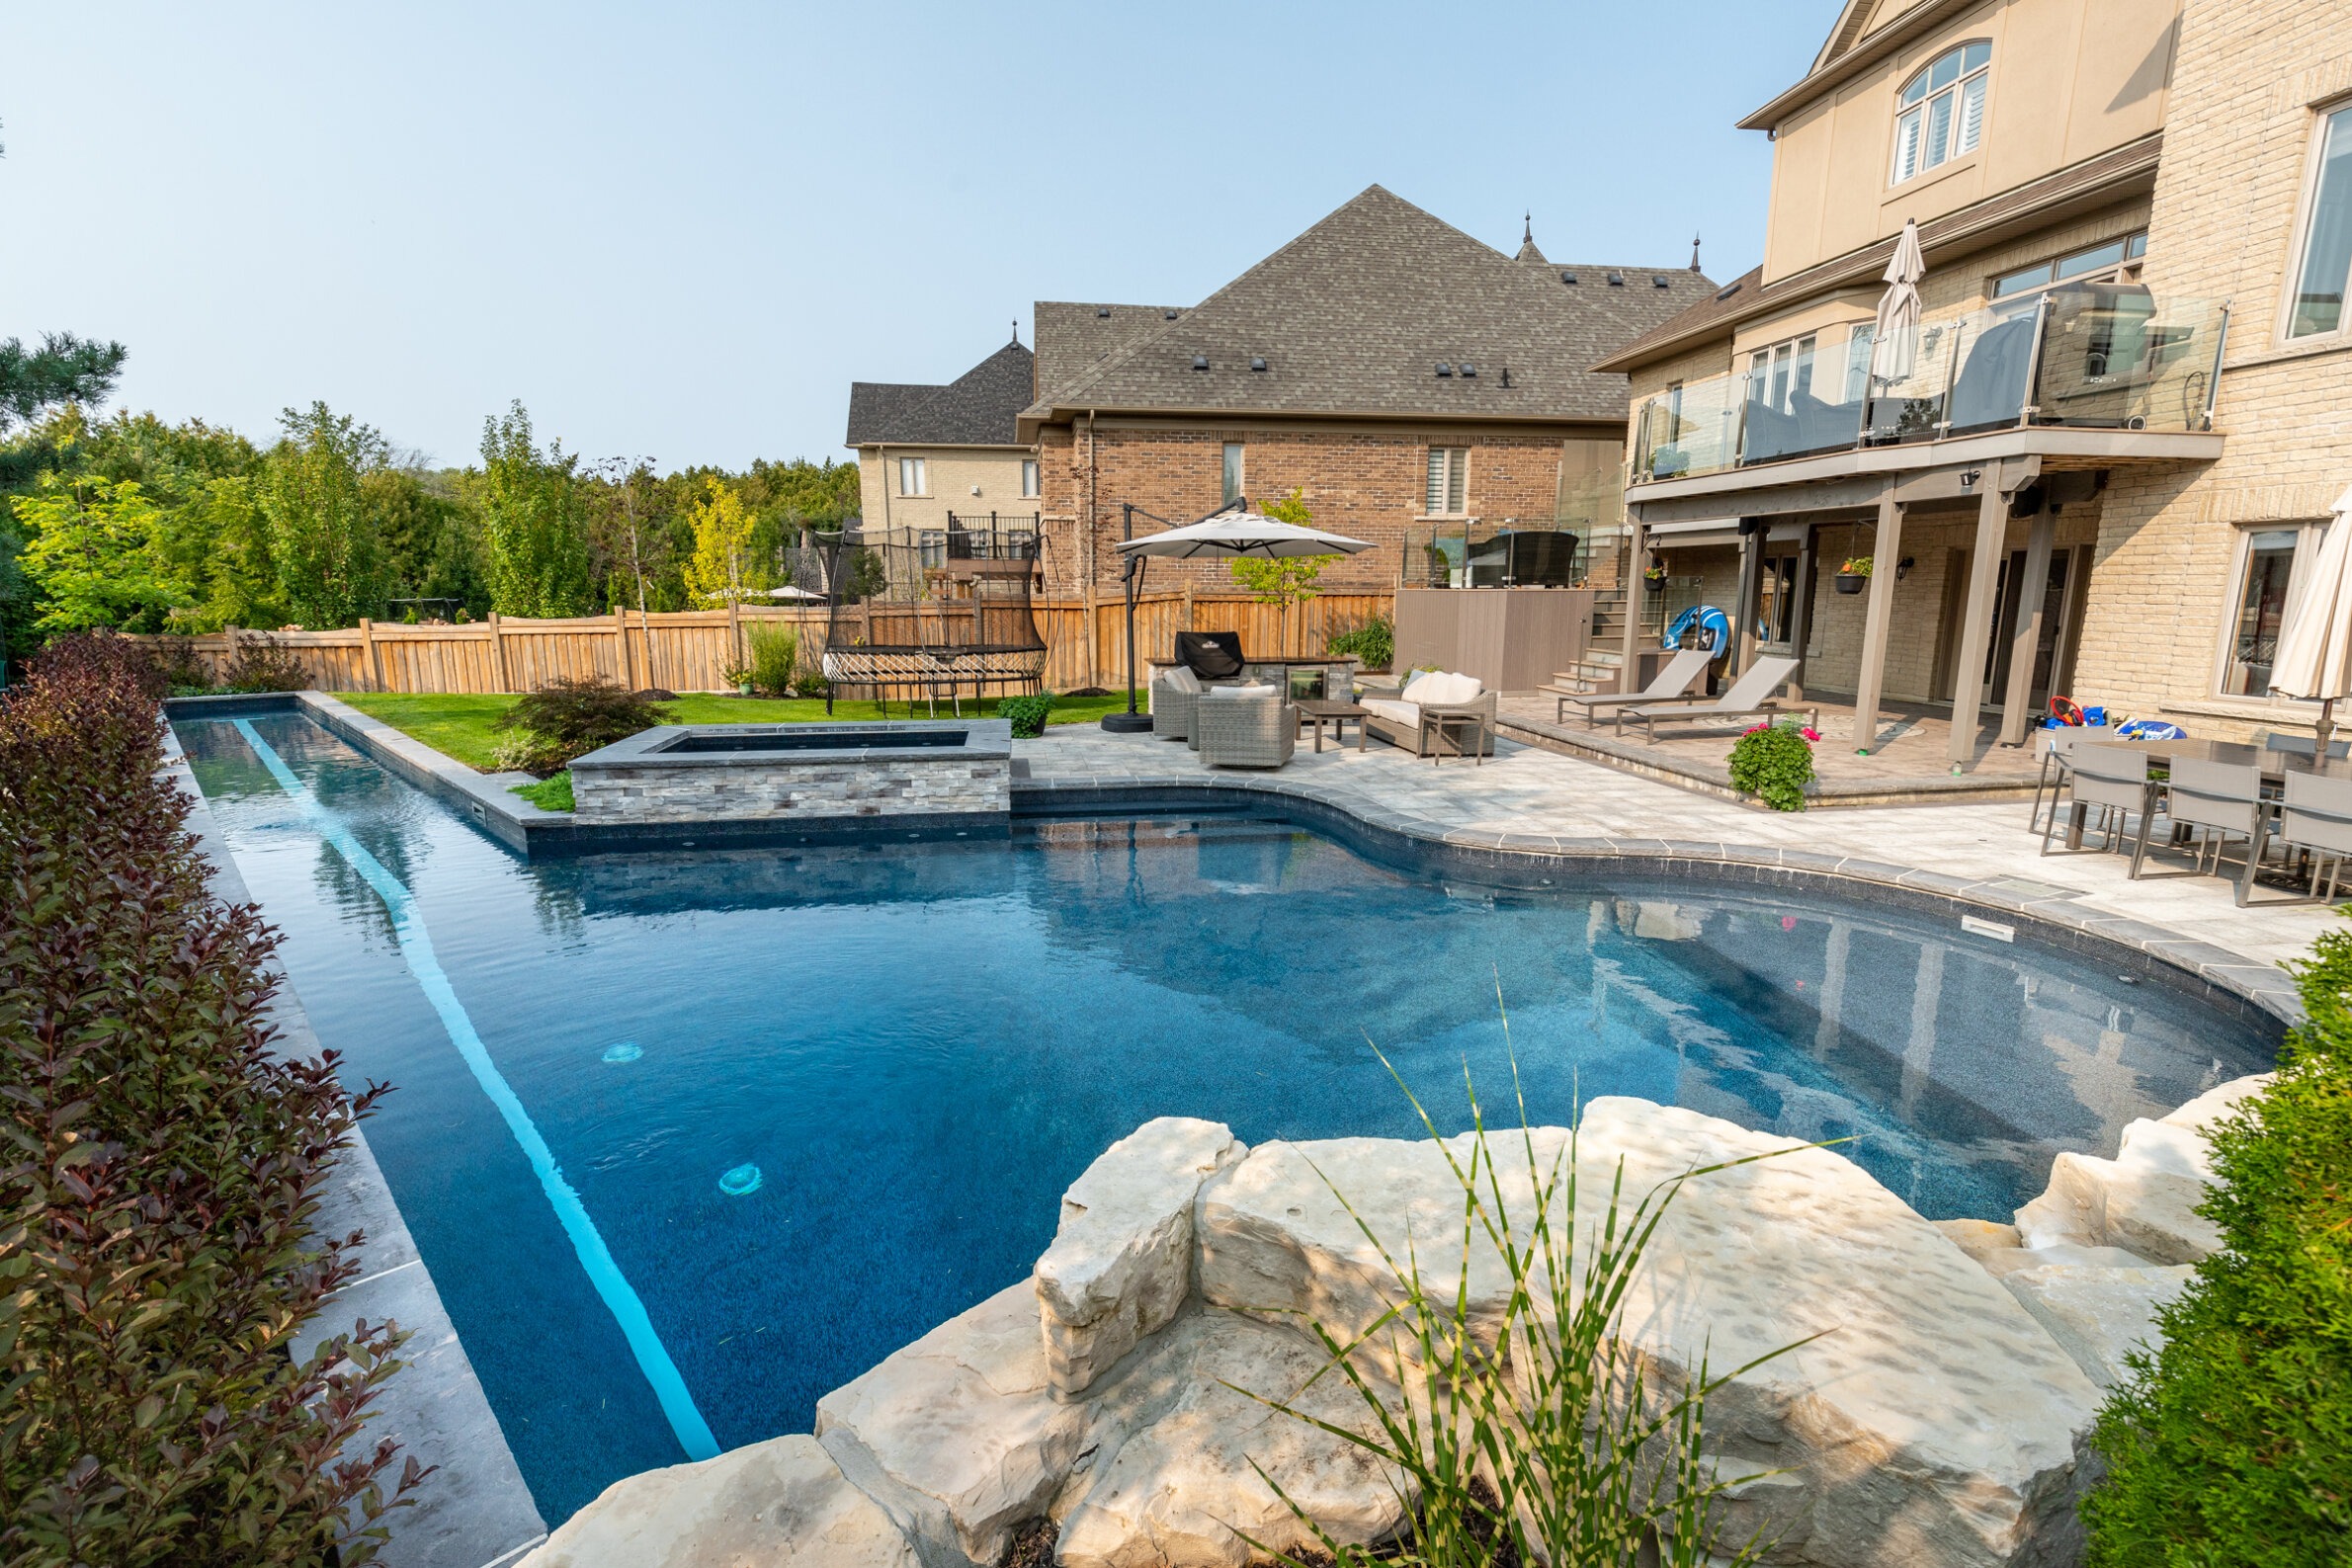 Backyard with a luxurious inground swimming pool, stone patio, outdoor furniture, lush greenery, and a two-story house with a balcony.